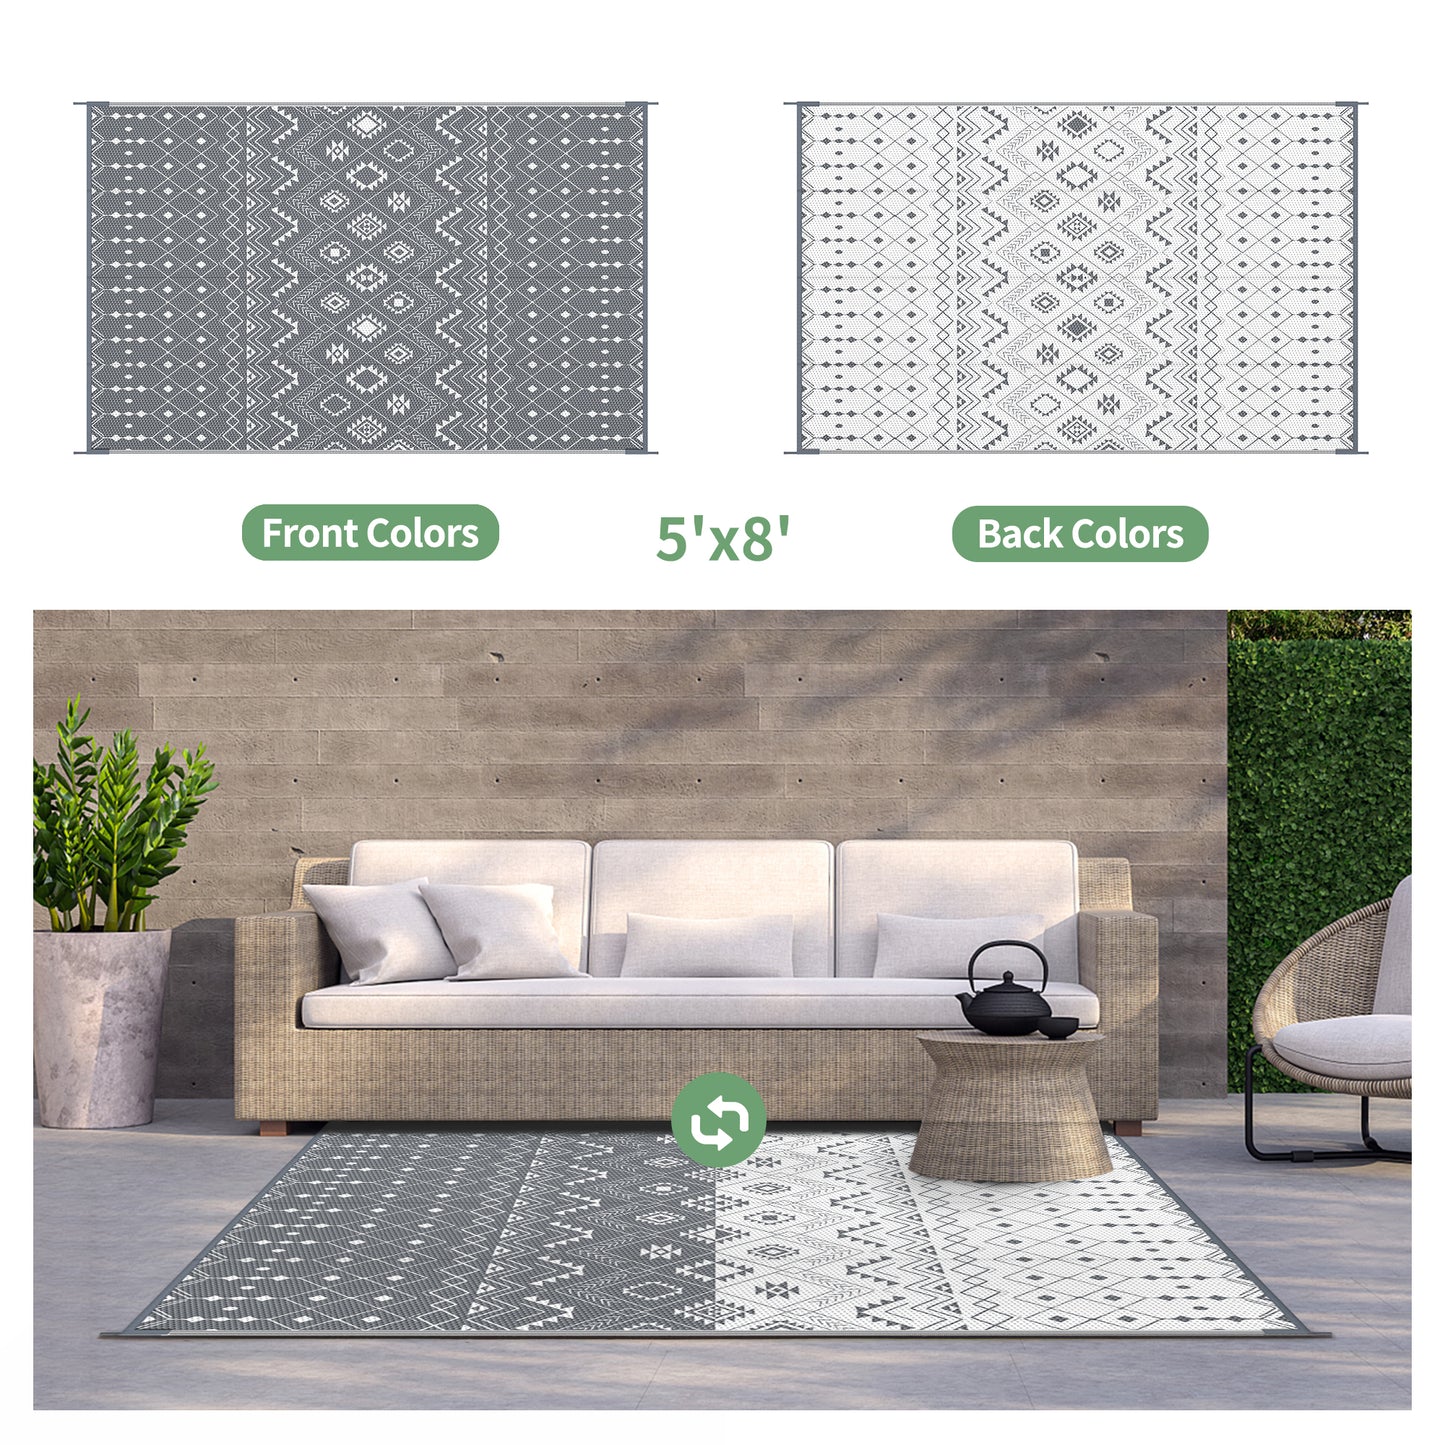 GENIMO Outdoor Rug for Patio Clearance, Waterproof Reversible Outside Carpet for Outdoor Decor, Area Boho Rug, Plastic Straw Mat for RV, Deck, Patio, Camping, Camper